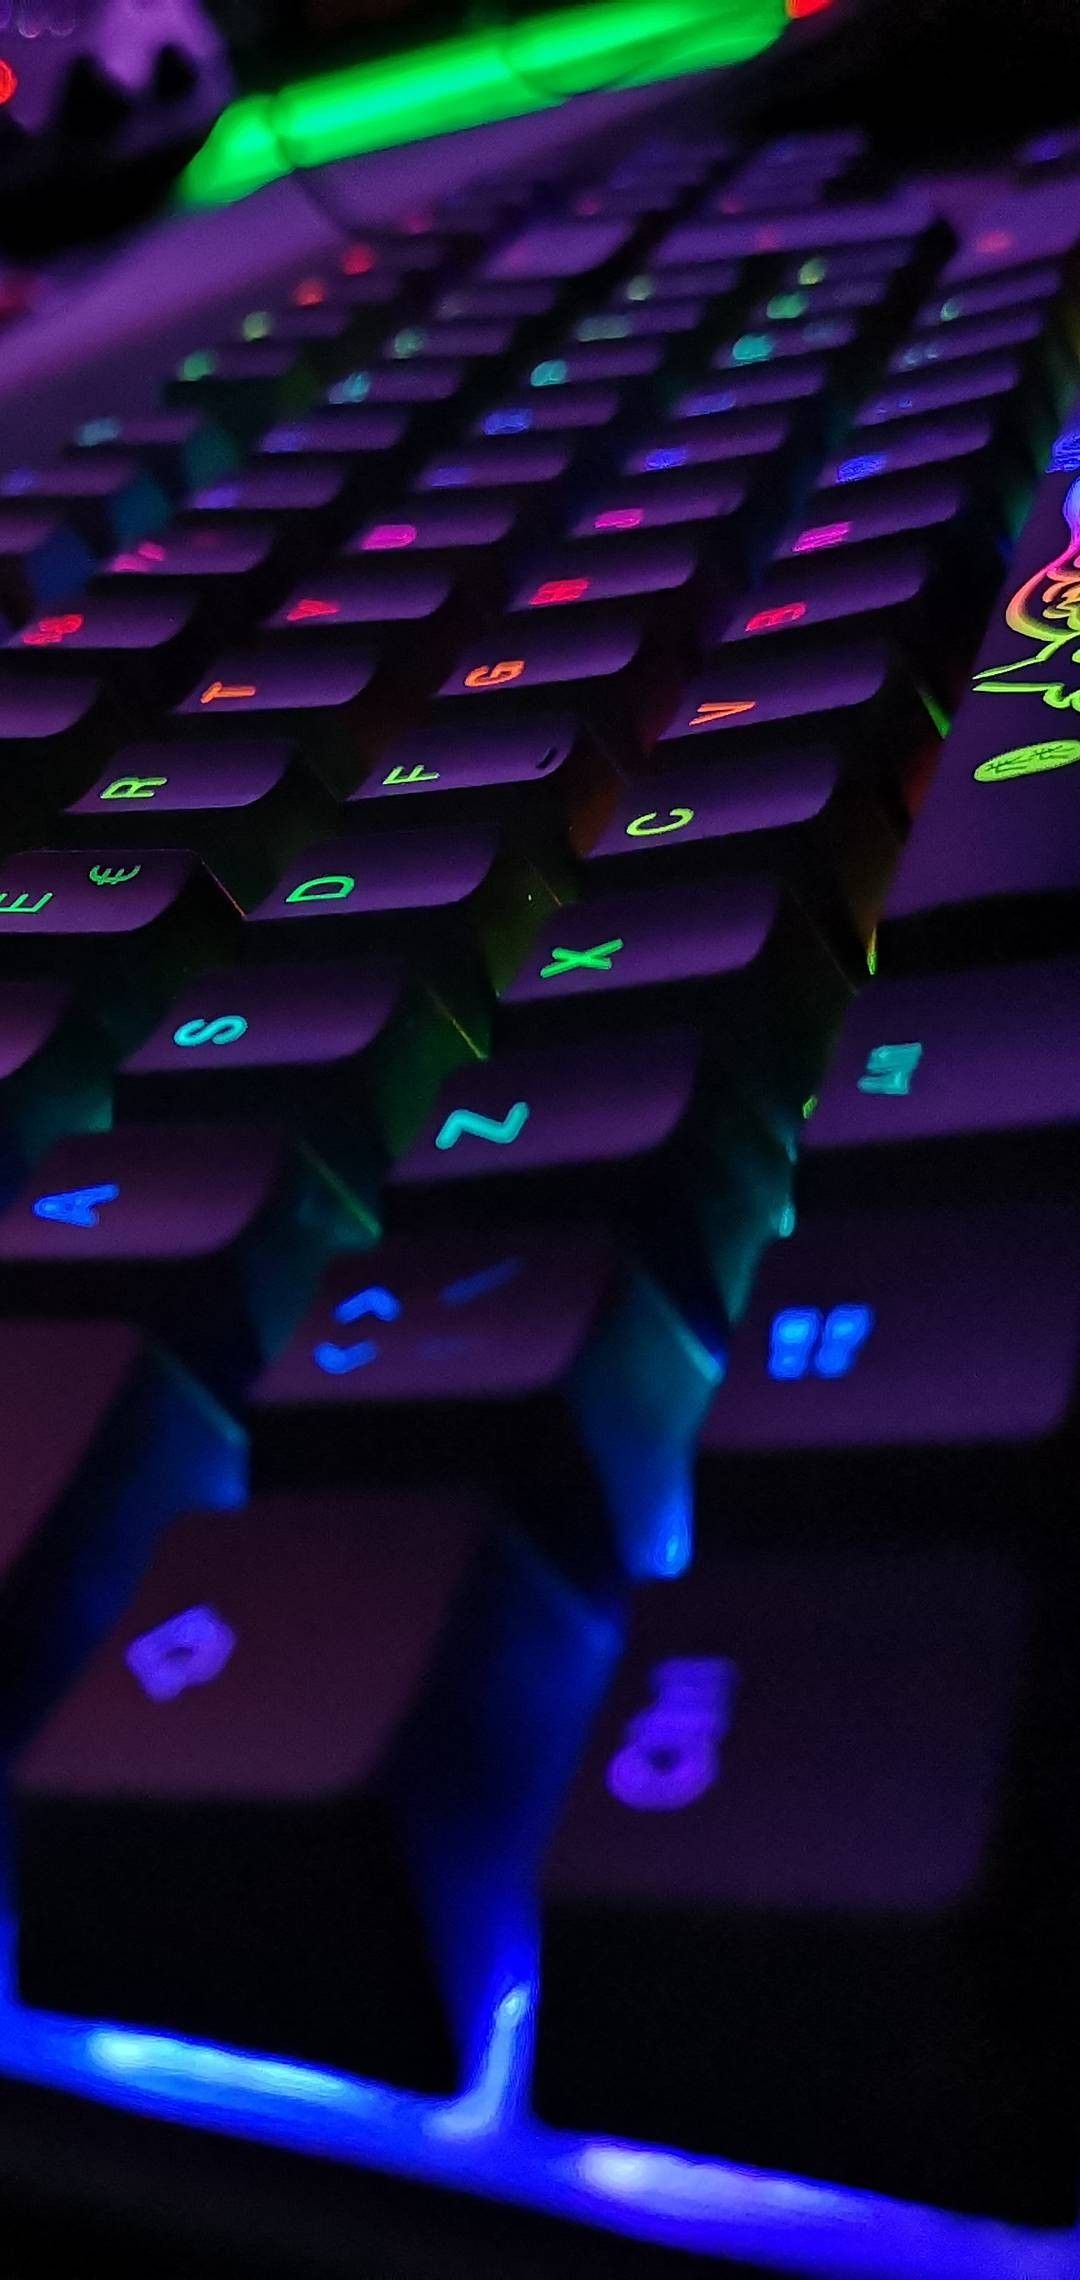 gamer #keyboards #fun #game #love #wallpaper #cool #coulers #couple #rainbow #awesome. Game wallpaper iphone, Gaming wallpaper, Best gaming wallpaper